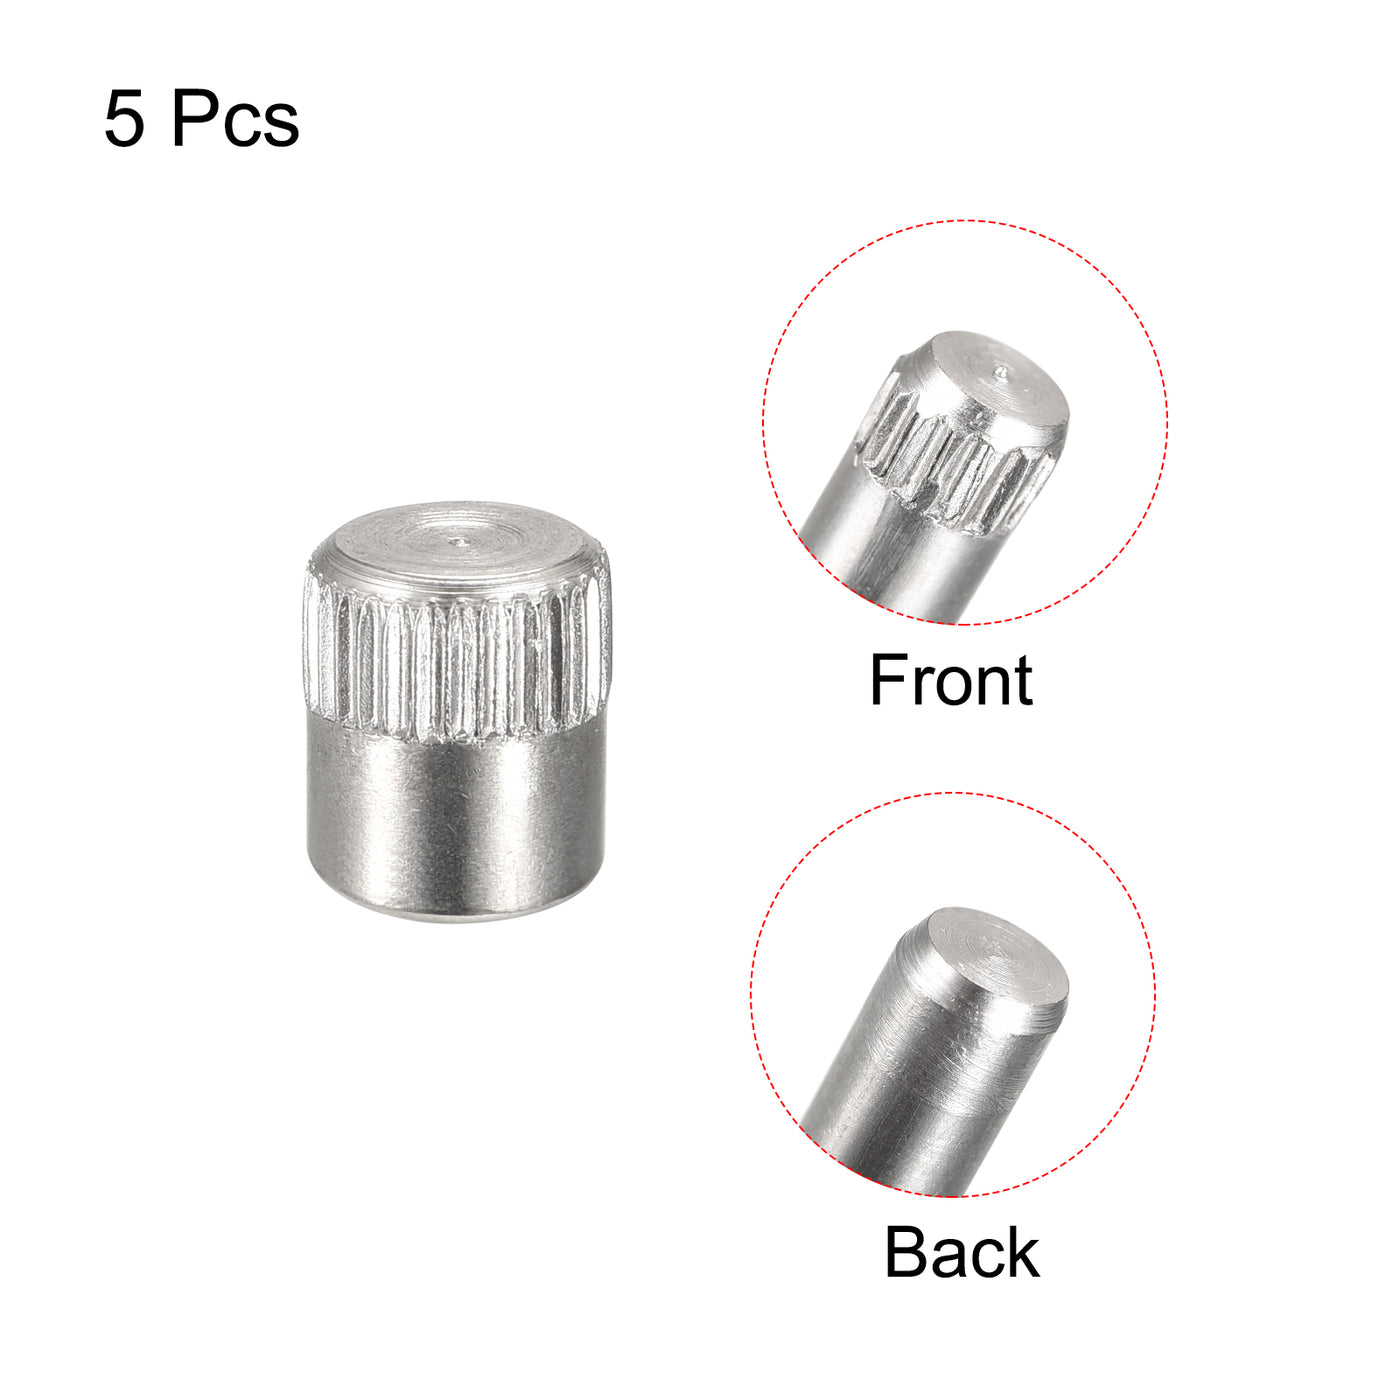 uxcell Uxcell 8x10mm 304 Stainless Steel Dowel Pins, 5Pcs Knurled Head Flat End Dowel Pin